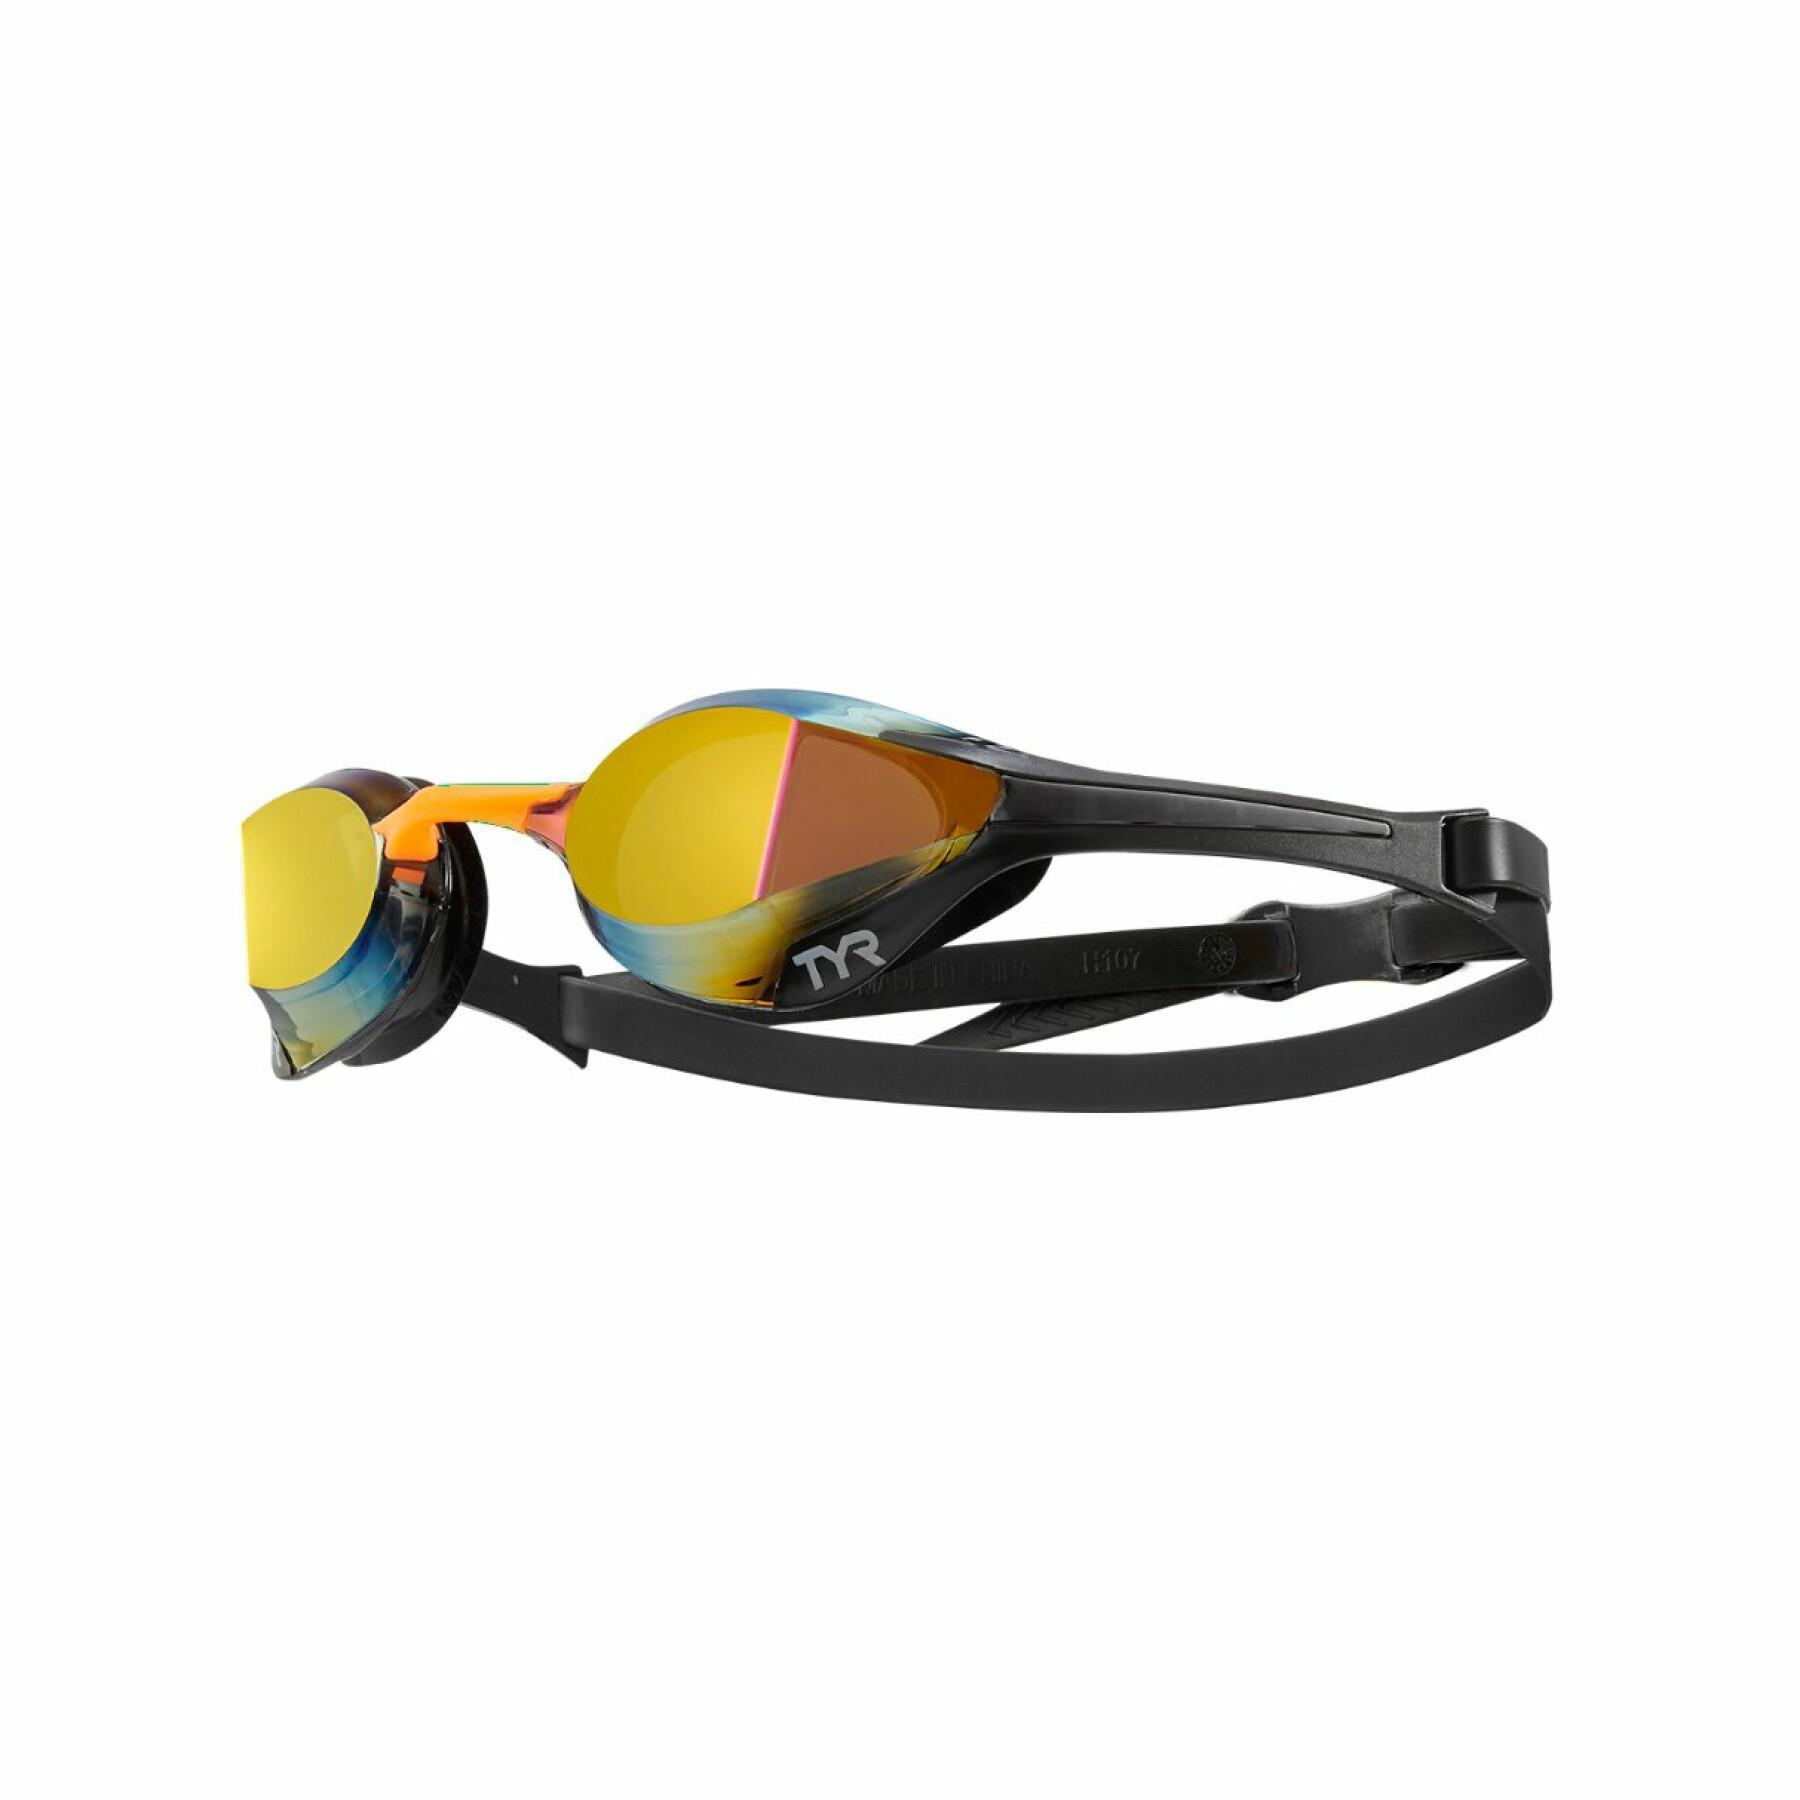 Zwembril TYR tracer-x elite mirrored racing goggles